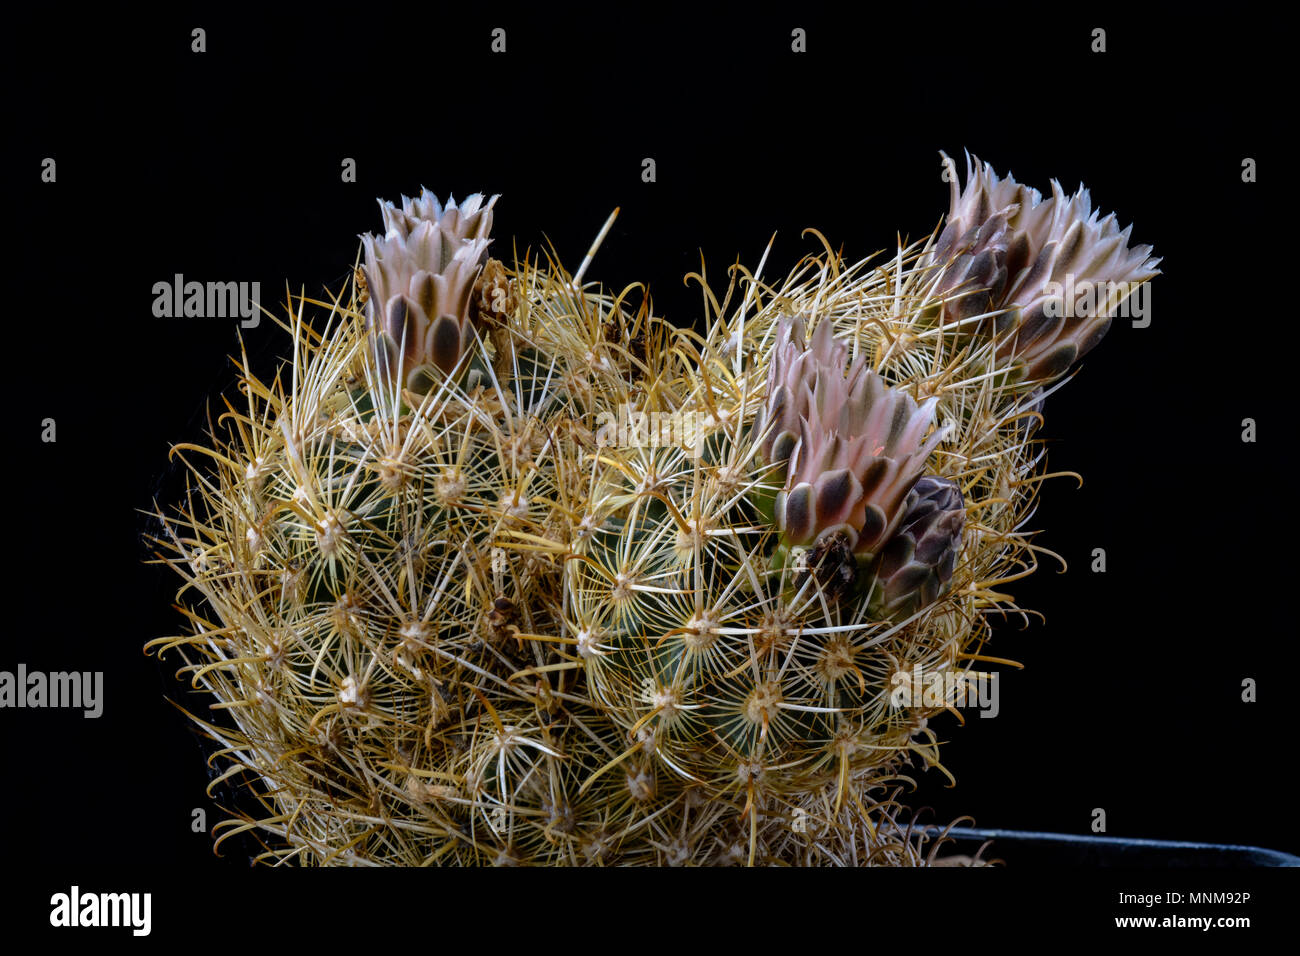 Cactus Ancistrocactus megarhizus with flower isolated on Black Stock Photo